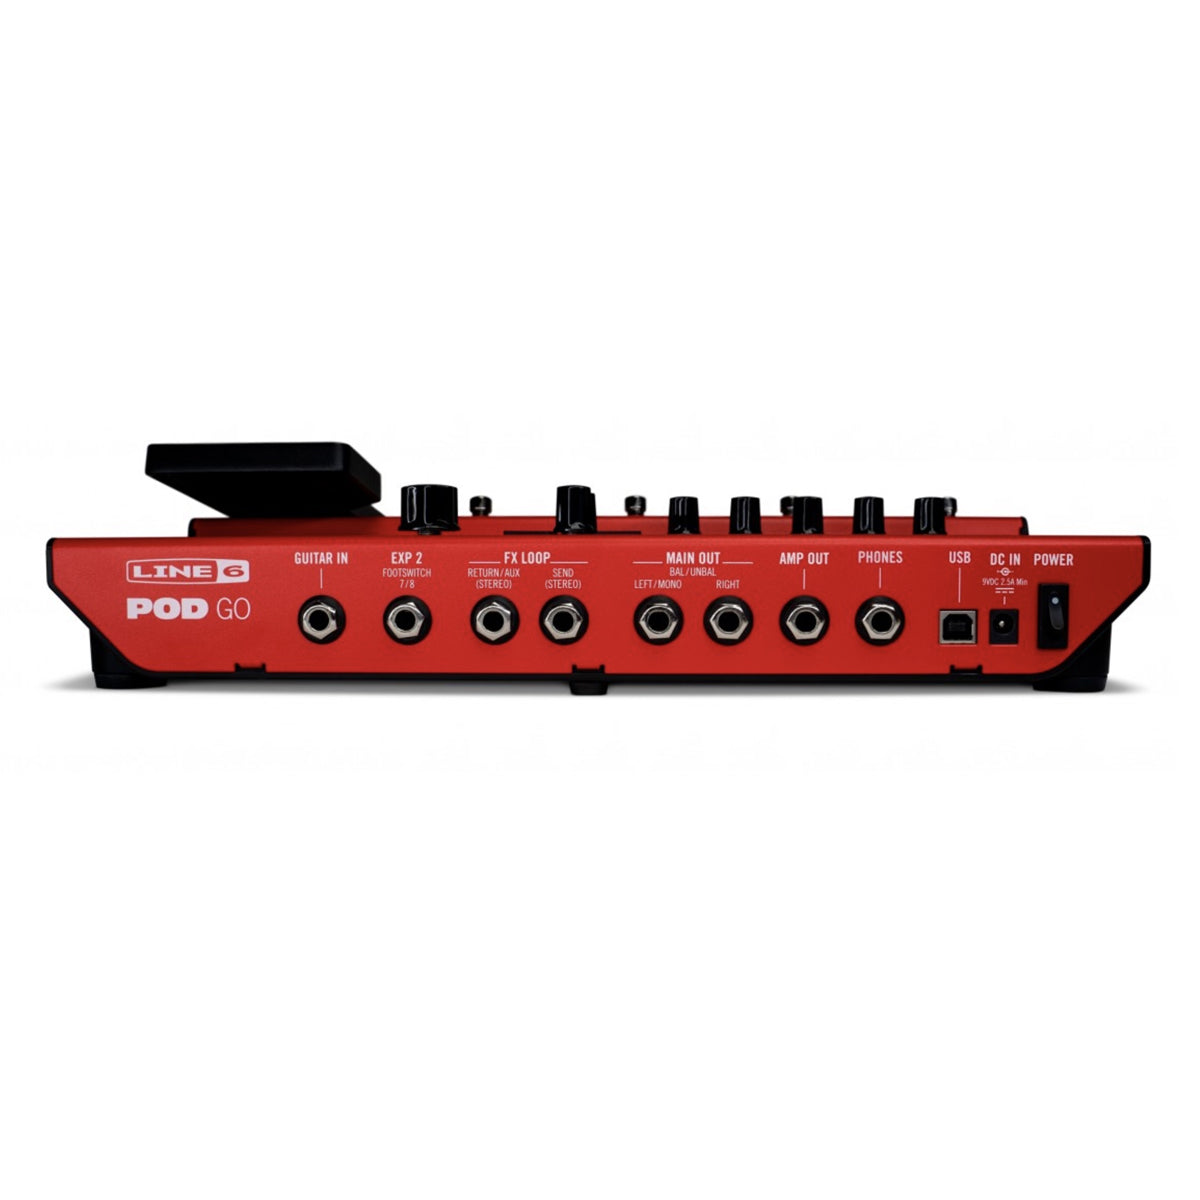 Line 6 POD Go Guitar Multi-Effects Pedal - Red Ltd Edition